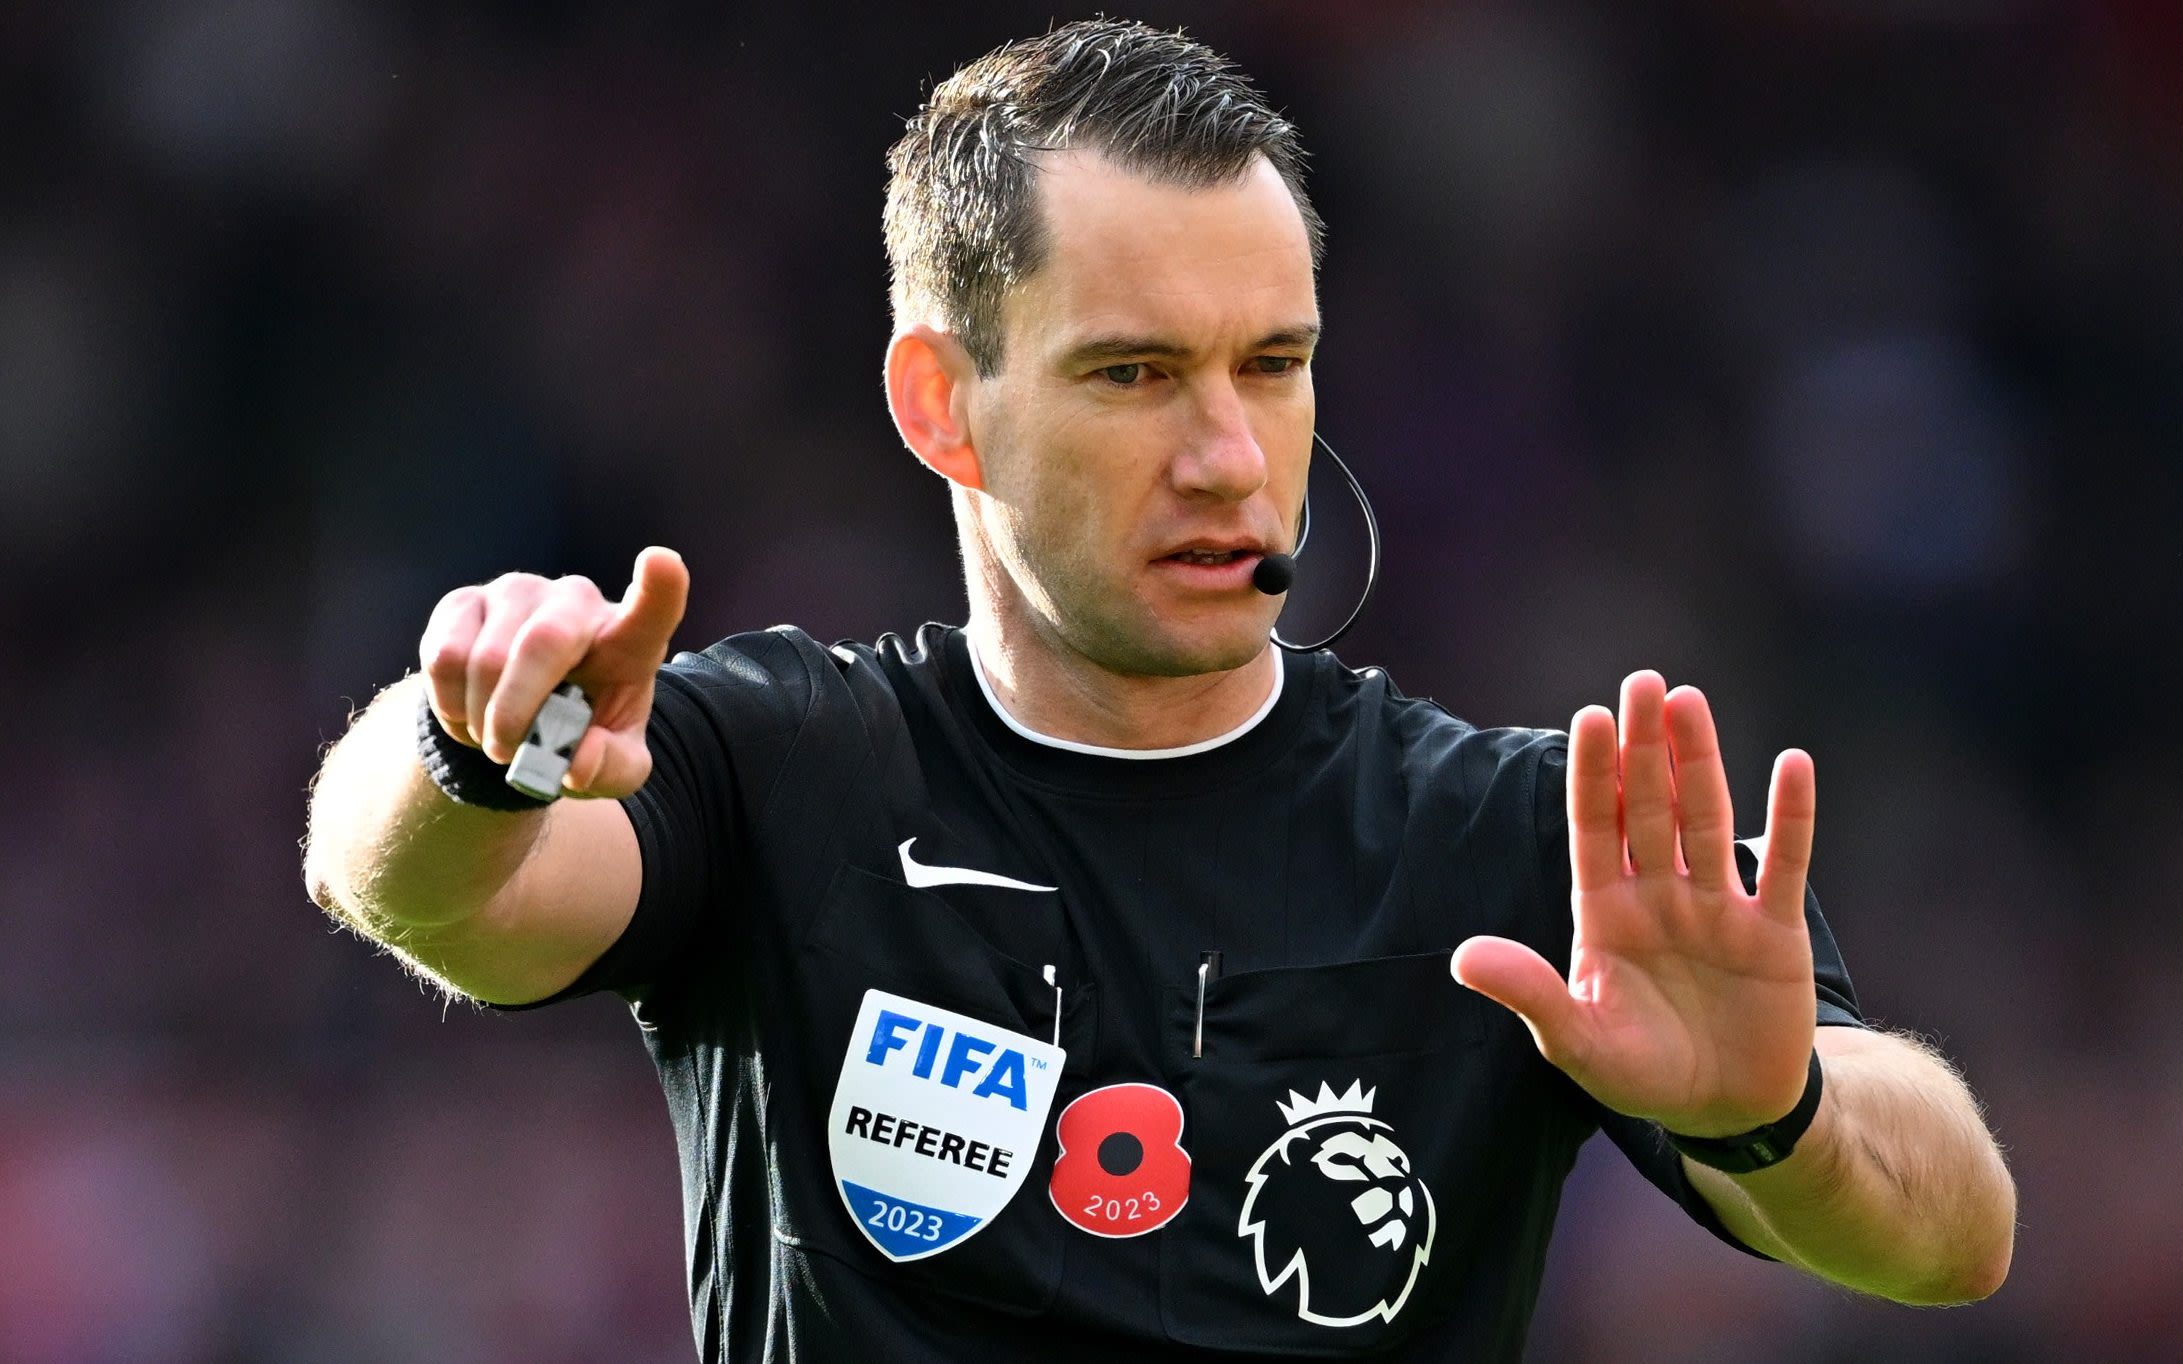 Premier League referee to wear special ‘RefCam’ in tonight’s match at Selhurst Park